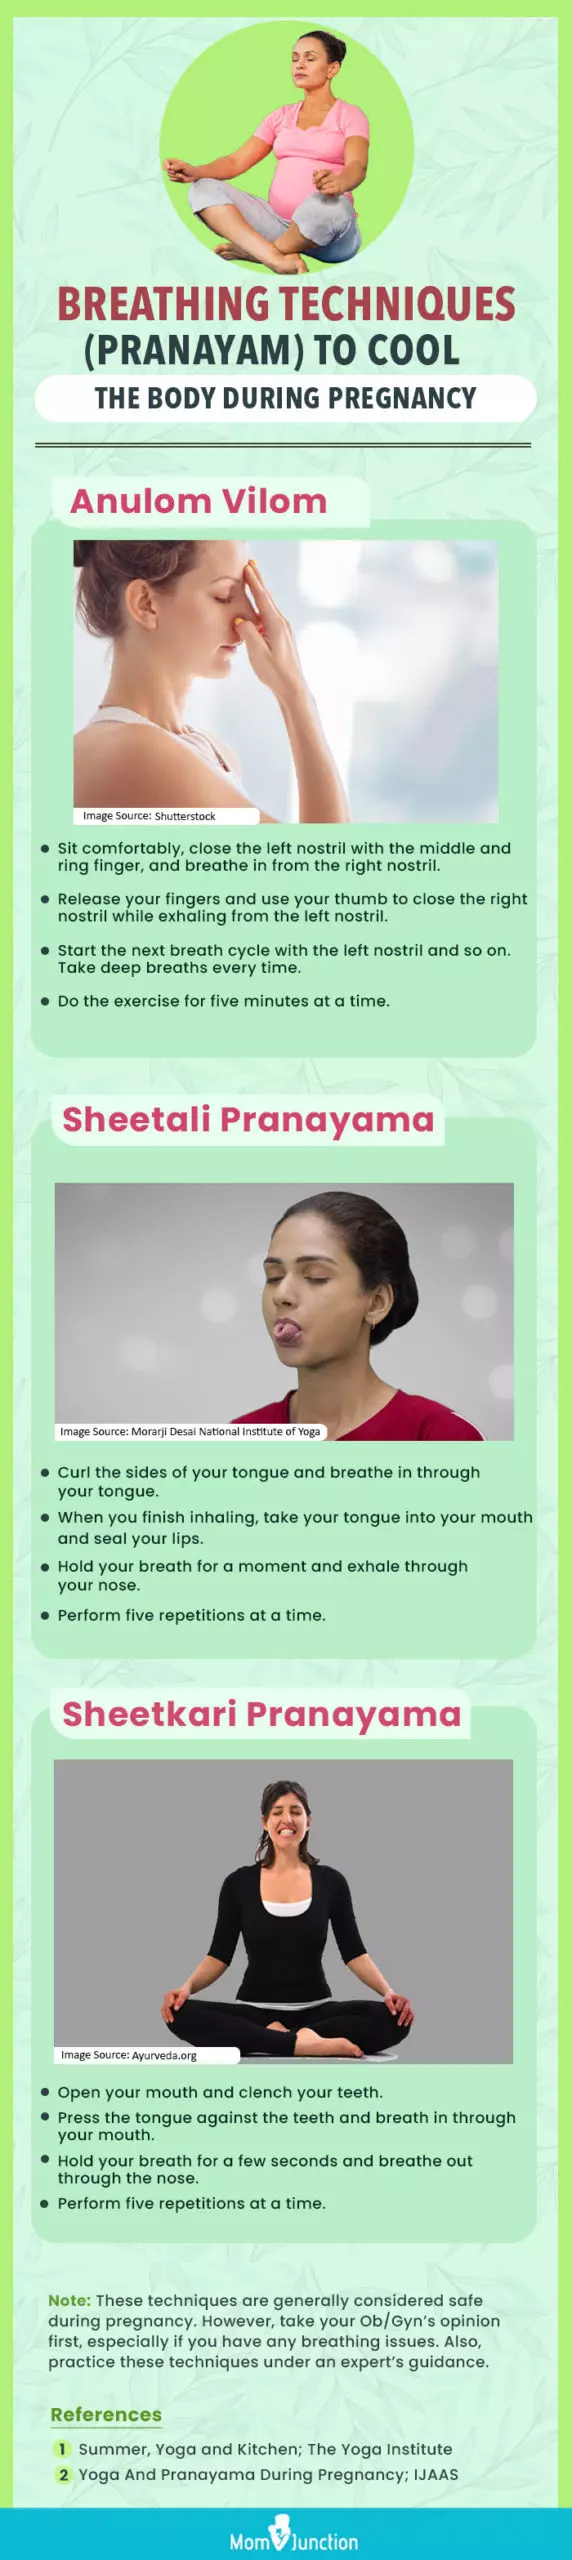 reathing techniques (Pranayam) to cool the body during pregnancy (infographic)